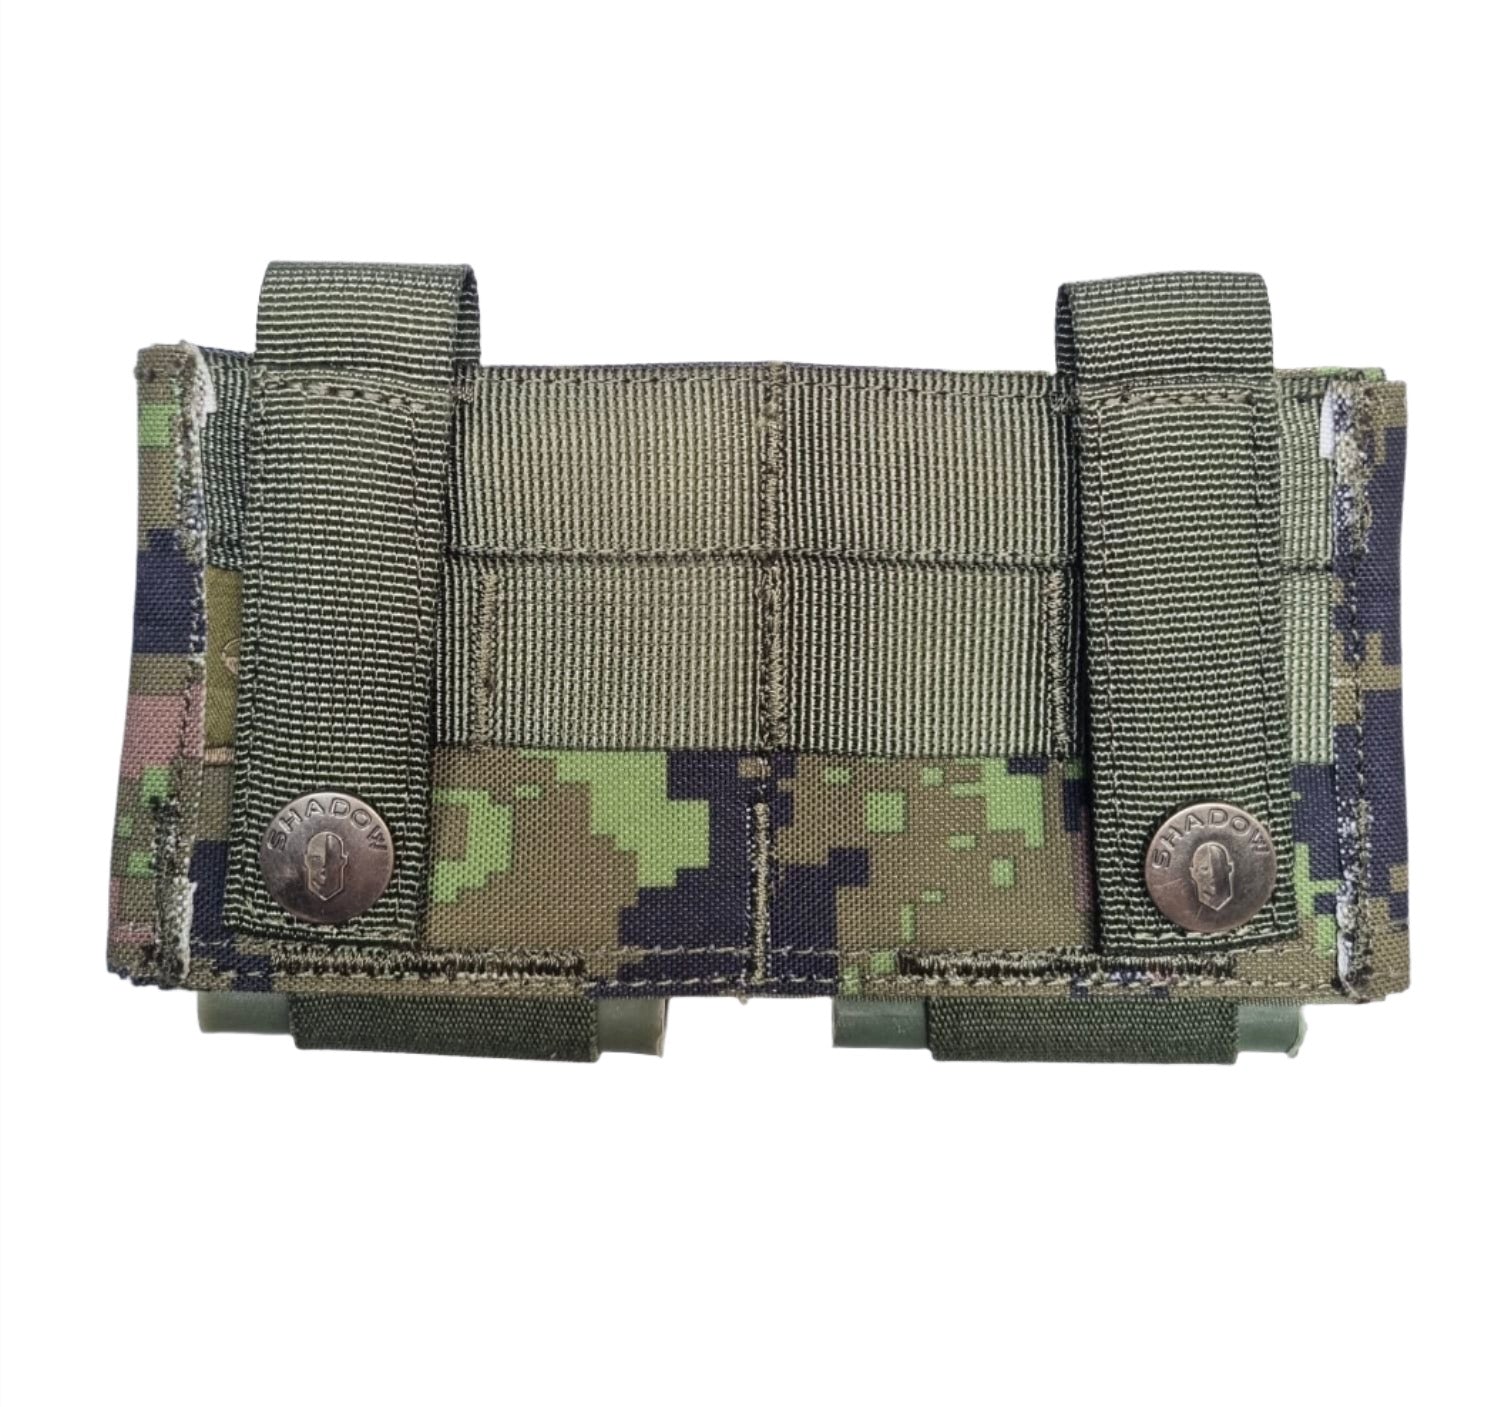 SHE-23032 GRIPTAC DOUBLE M4/M16 MAG POUCH CADPAT